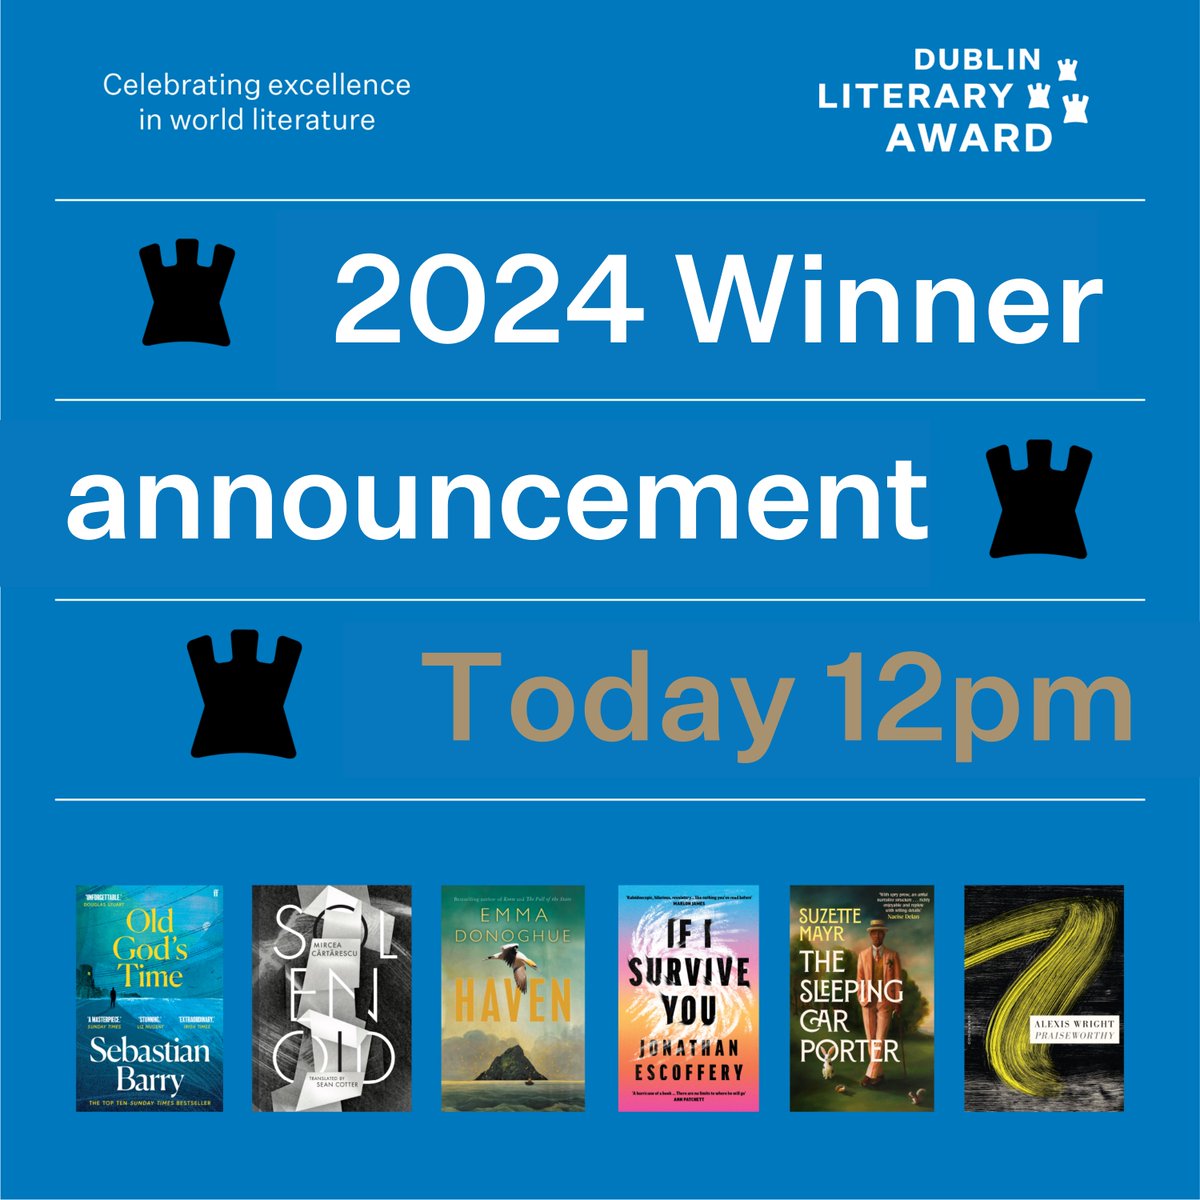 Today's the day! 🏆⌛ Join us online from 12pm GMT+1 on our YouTube channel or our Facebook page to discover the winner of the 2024 Dublin Literary Award! #DublinLitAward #DublinLiteraryAward